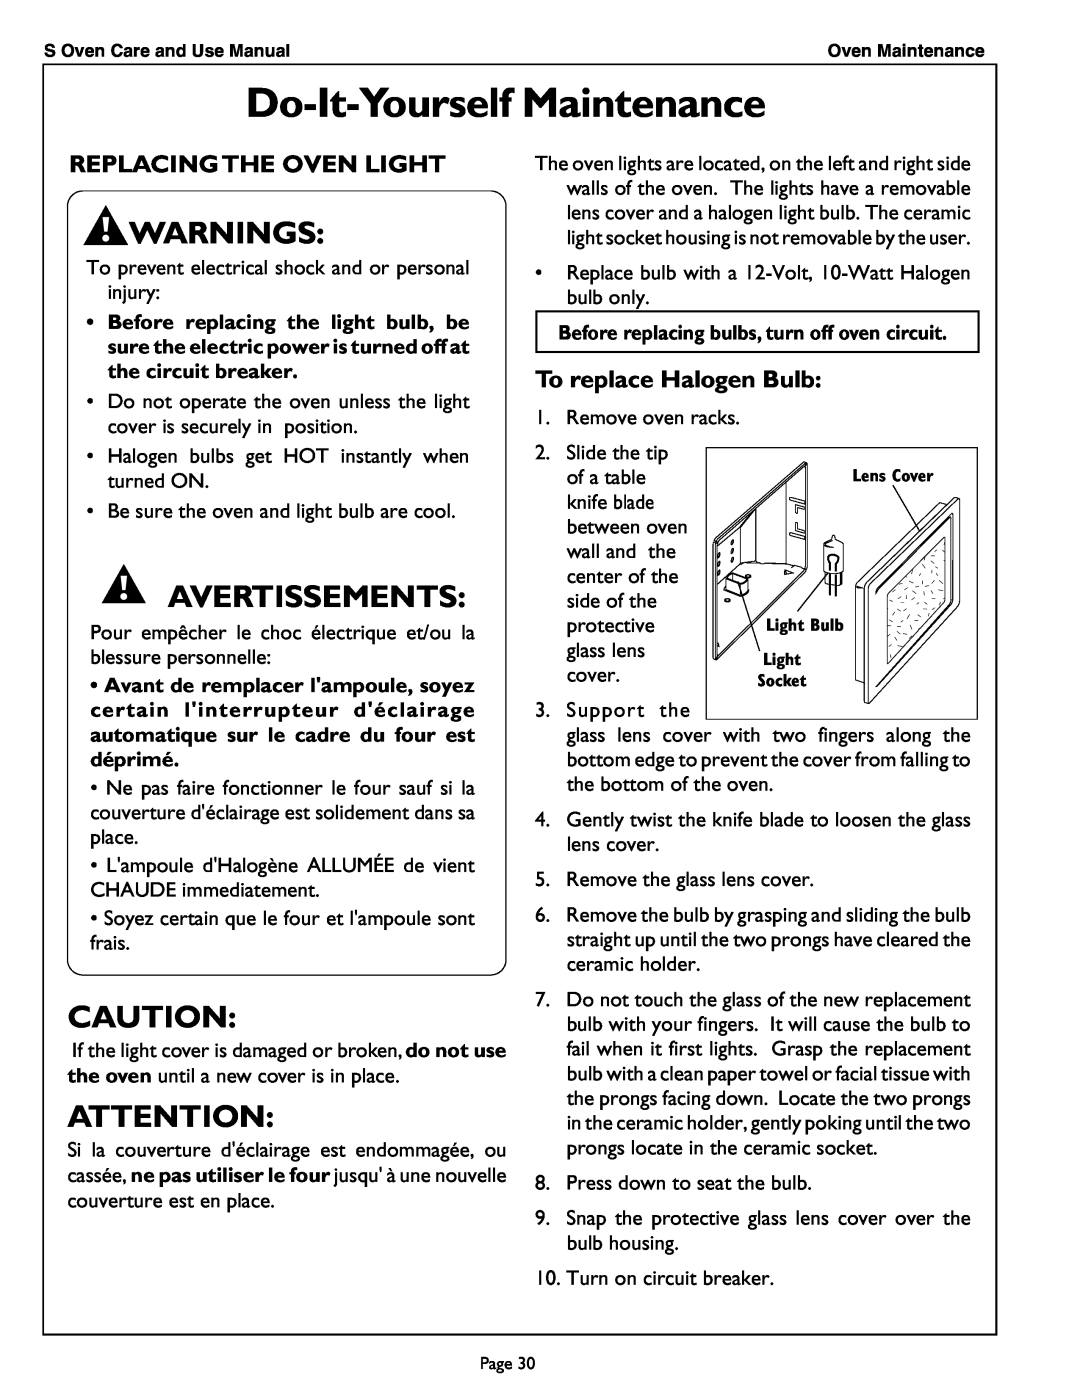 Thermador SCD302 Do-It-Yourself Maintenance, Warnings, Avertissements, Replacing The Oven Light, To replace Halogen Bulb 